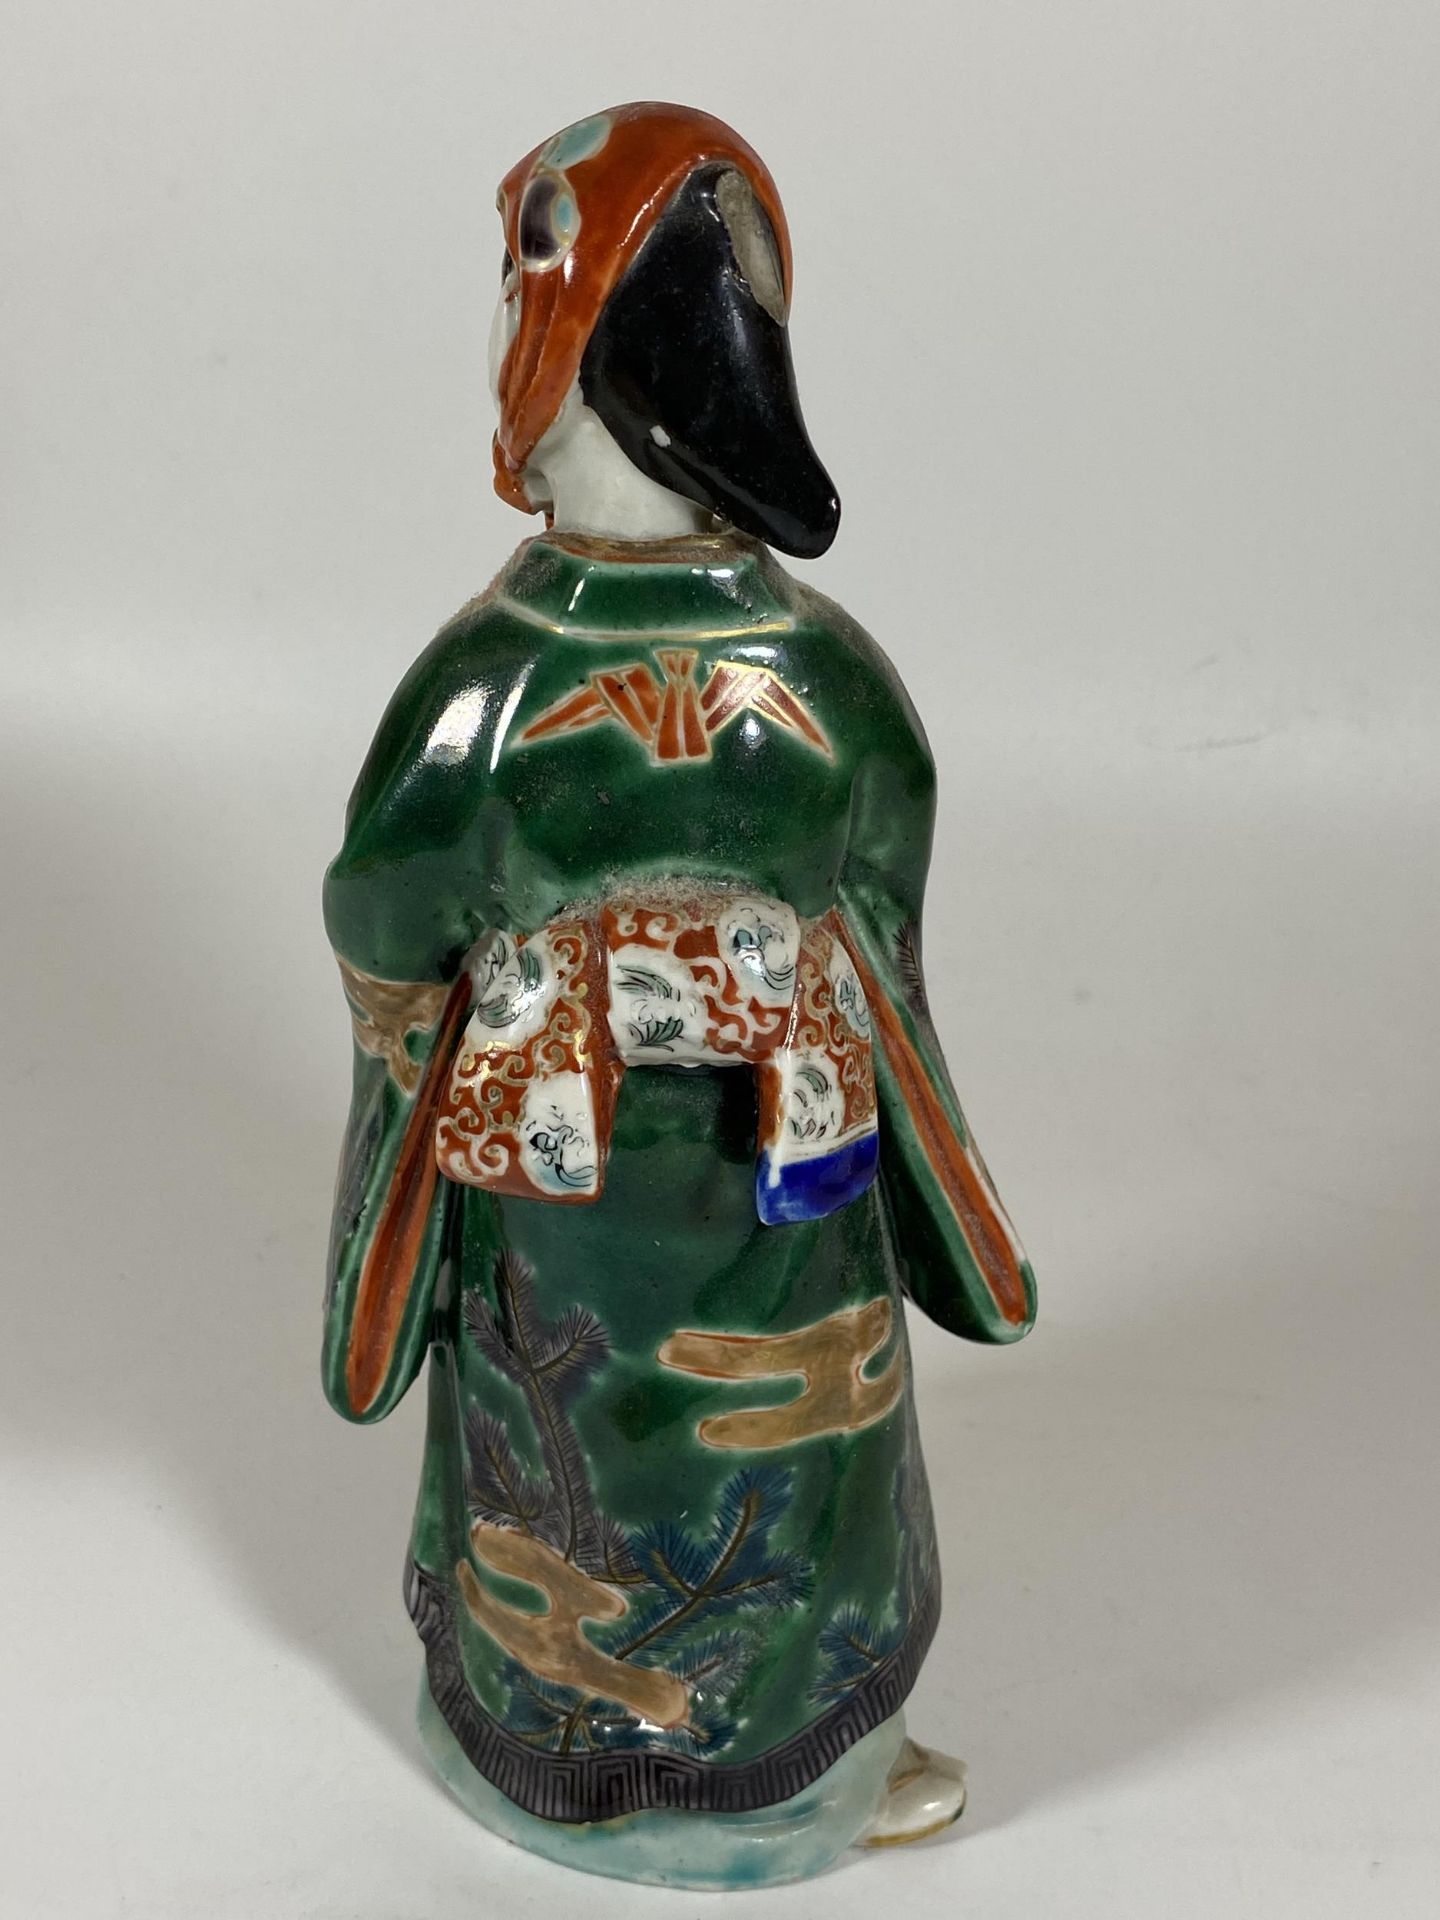 A 19TH CENTURY JAPANESE STONWARE FIGURE, HEIGHT 24.5CM - Image 4 of 7